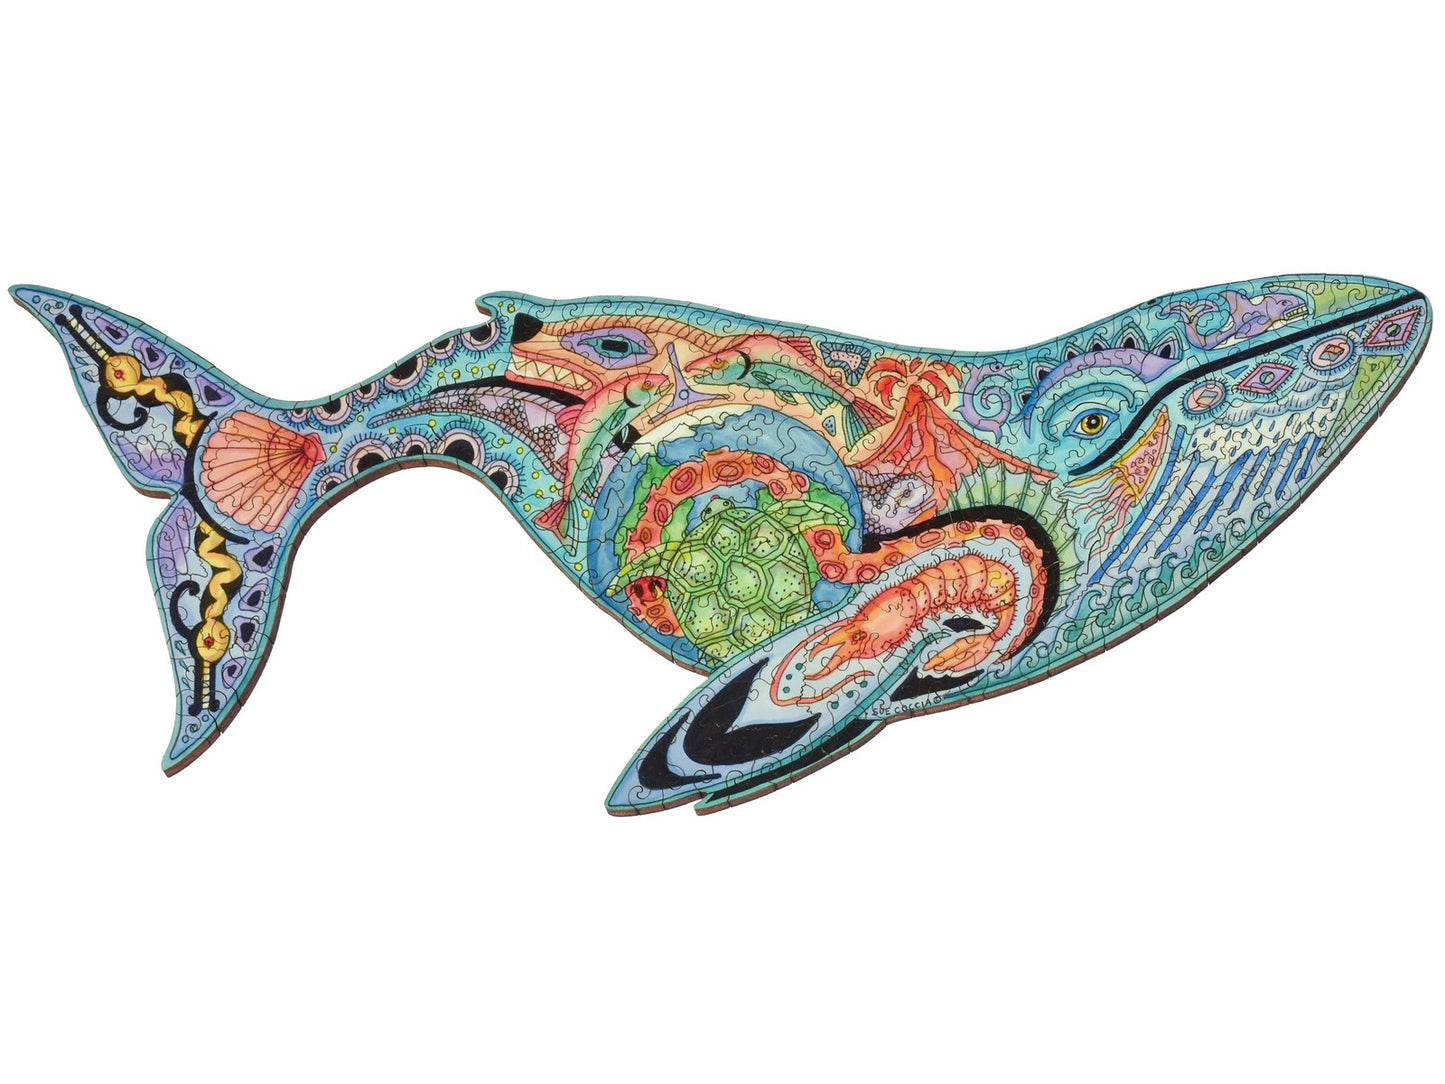 The front of the puzzle, Blue Whale, which shows various sea creatures in the shape of a whale.